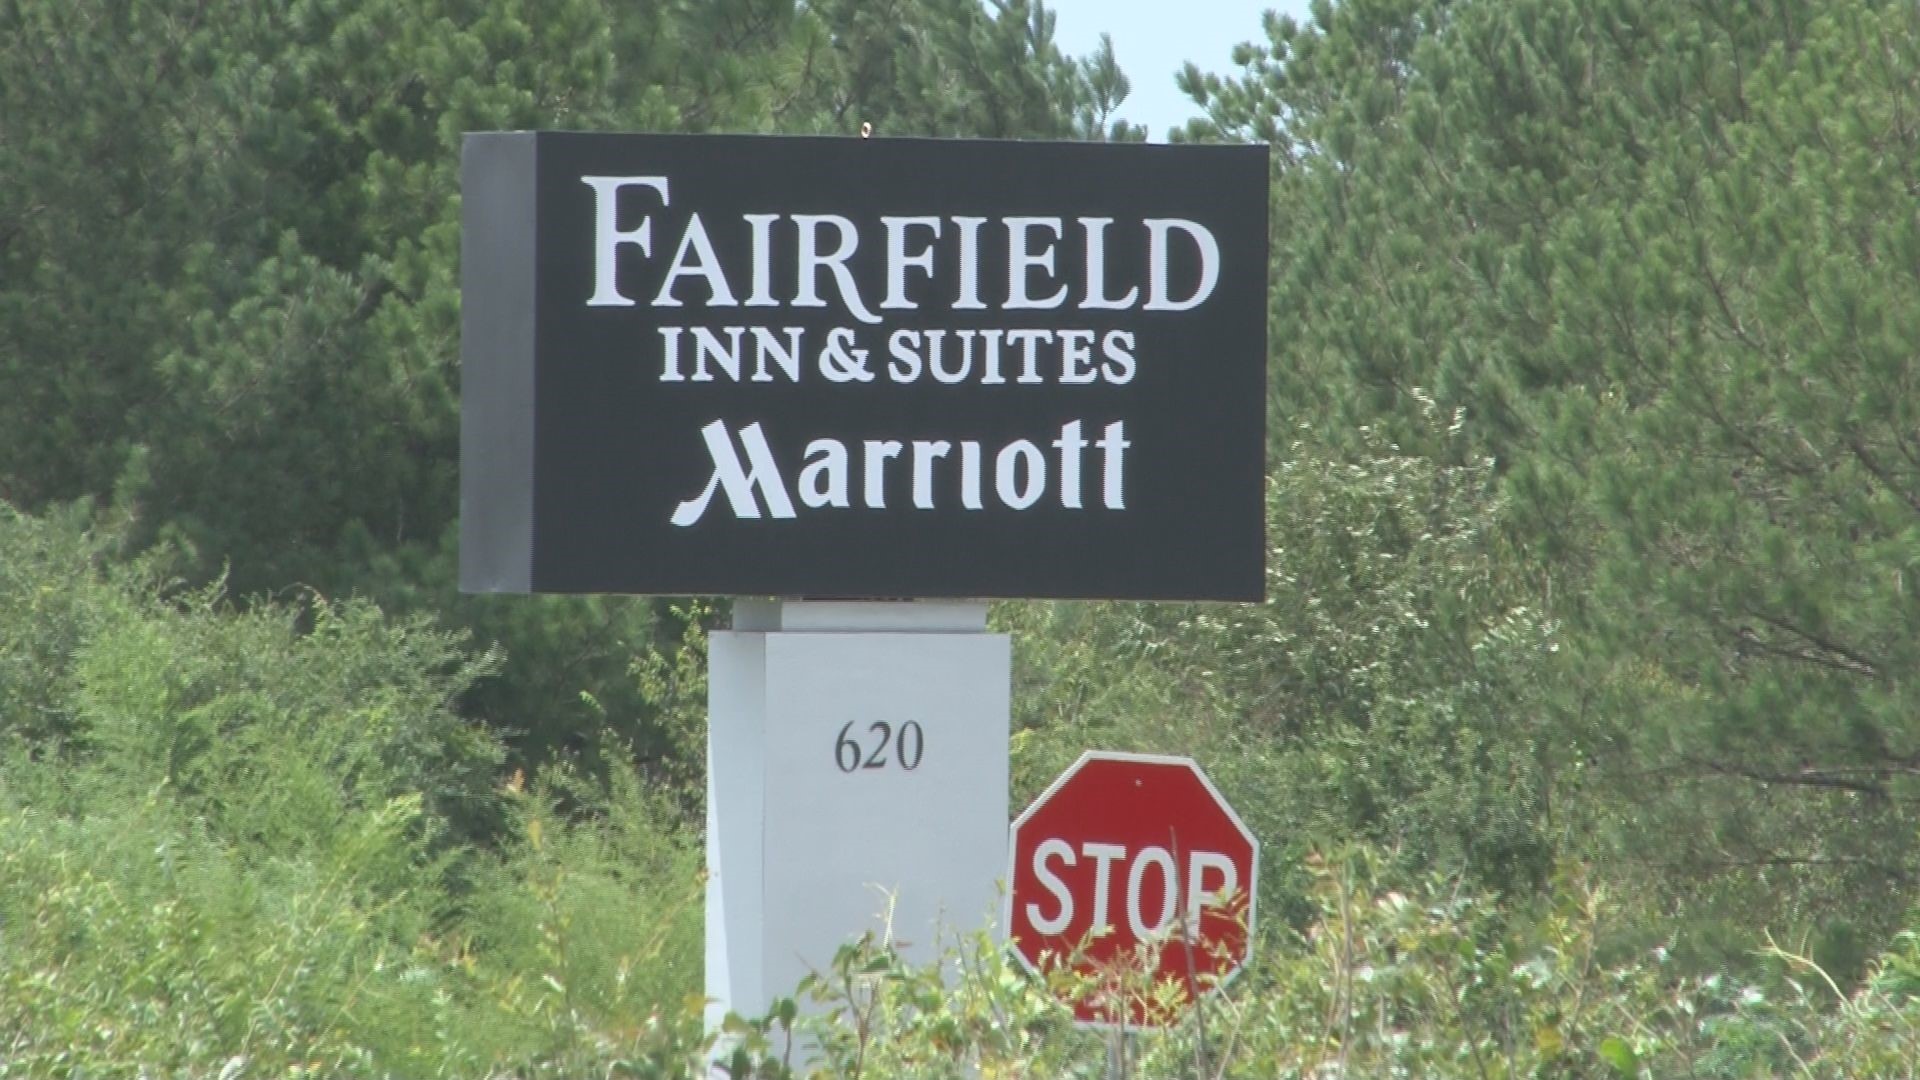 Fairfiled Inn and Suites in Dublin was accused of price gouging after a Hurricane Dorian evacuee posted a picture of their prices on social media